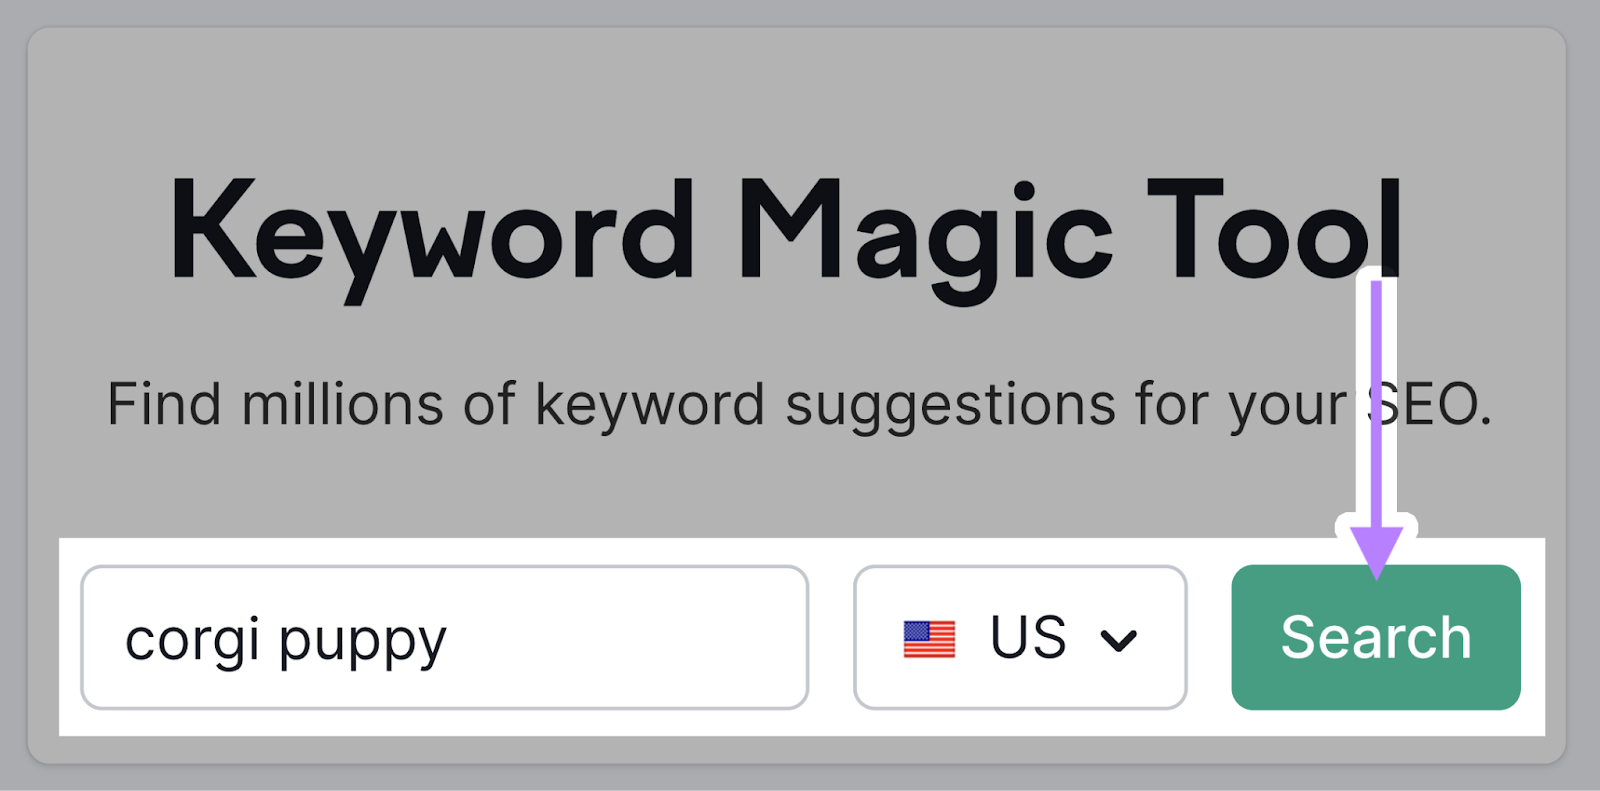 A search for "corgi puppy" in the U.S. in Semrush's Keyword Magic Tool. There's an arrow to the "Search" button.